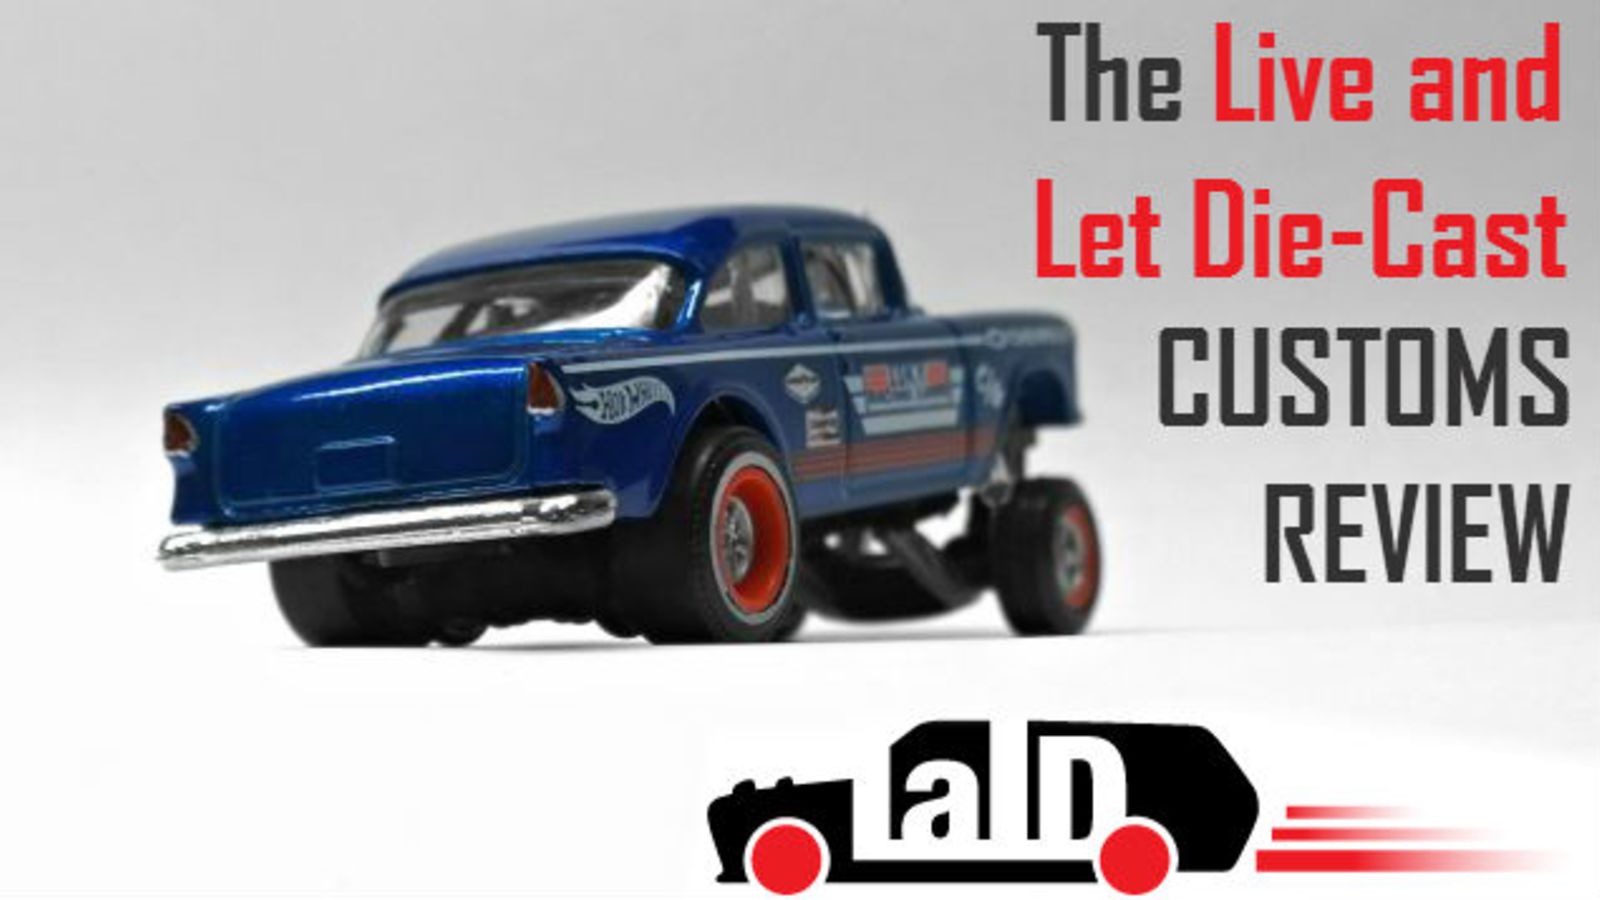 Illustration for article titled The Live and Let Die-Cast Customs Review - 8/19 - 8/25/2014